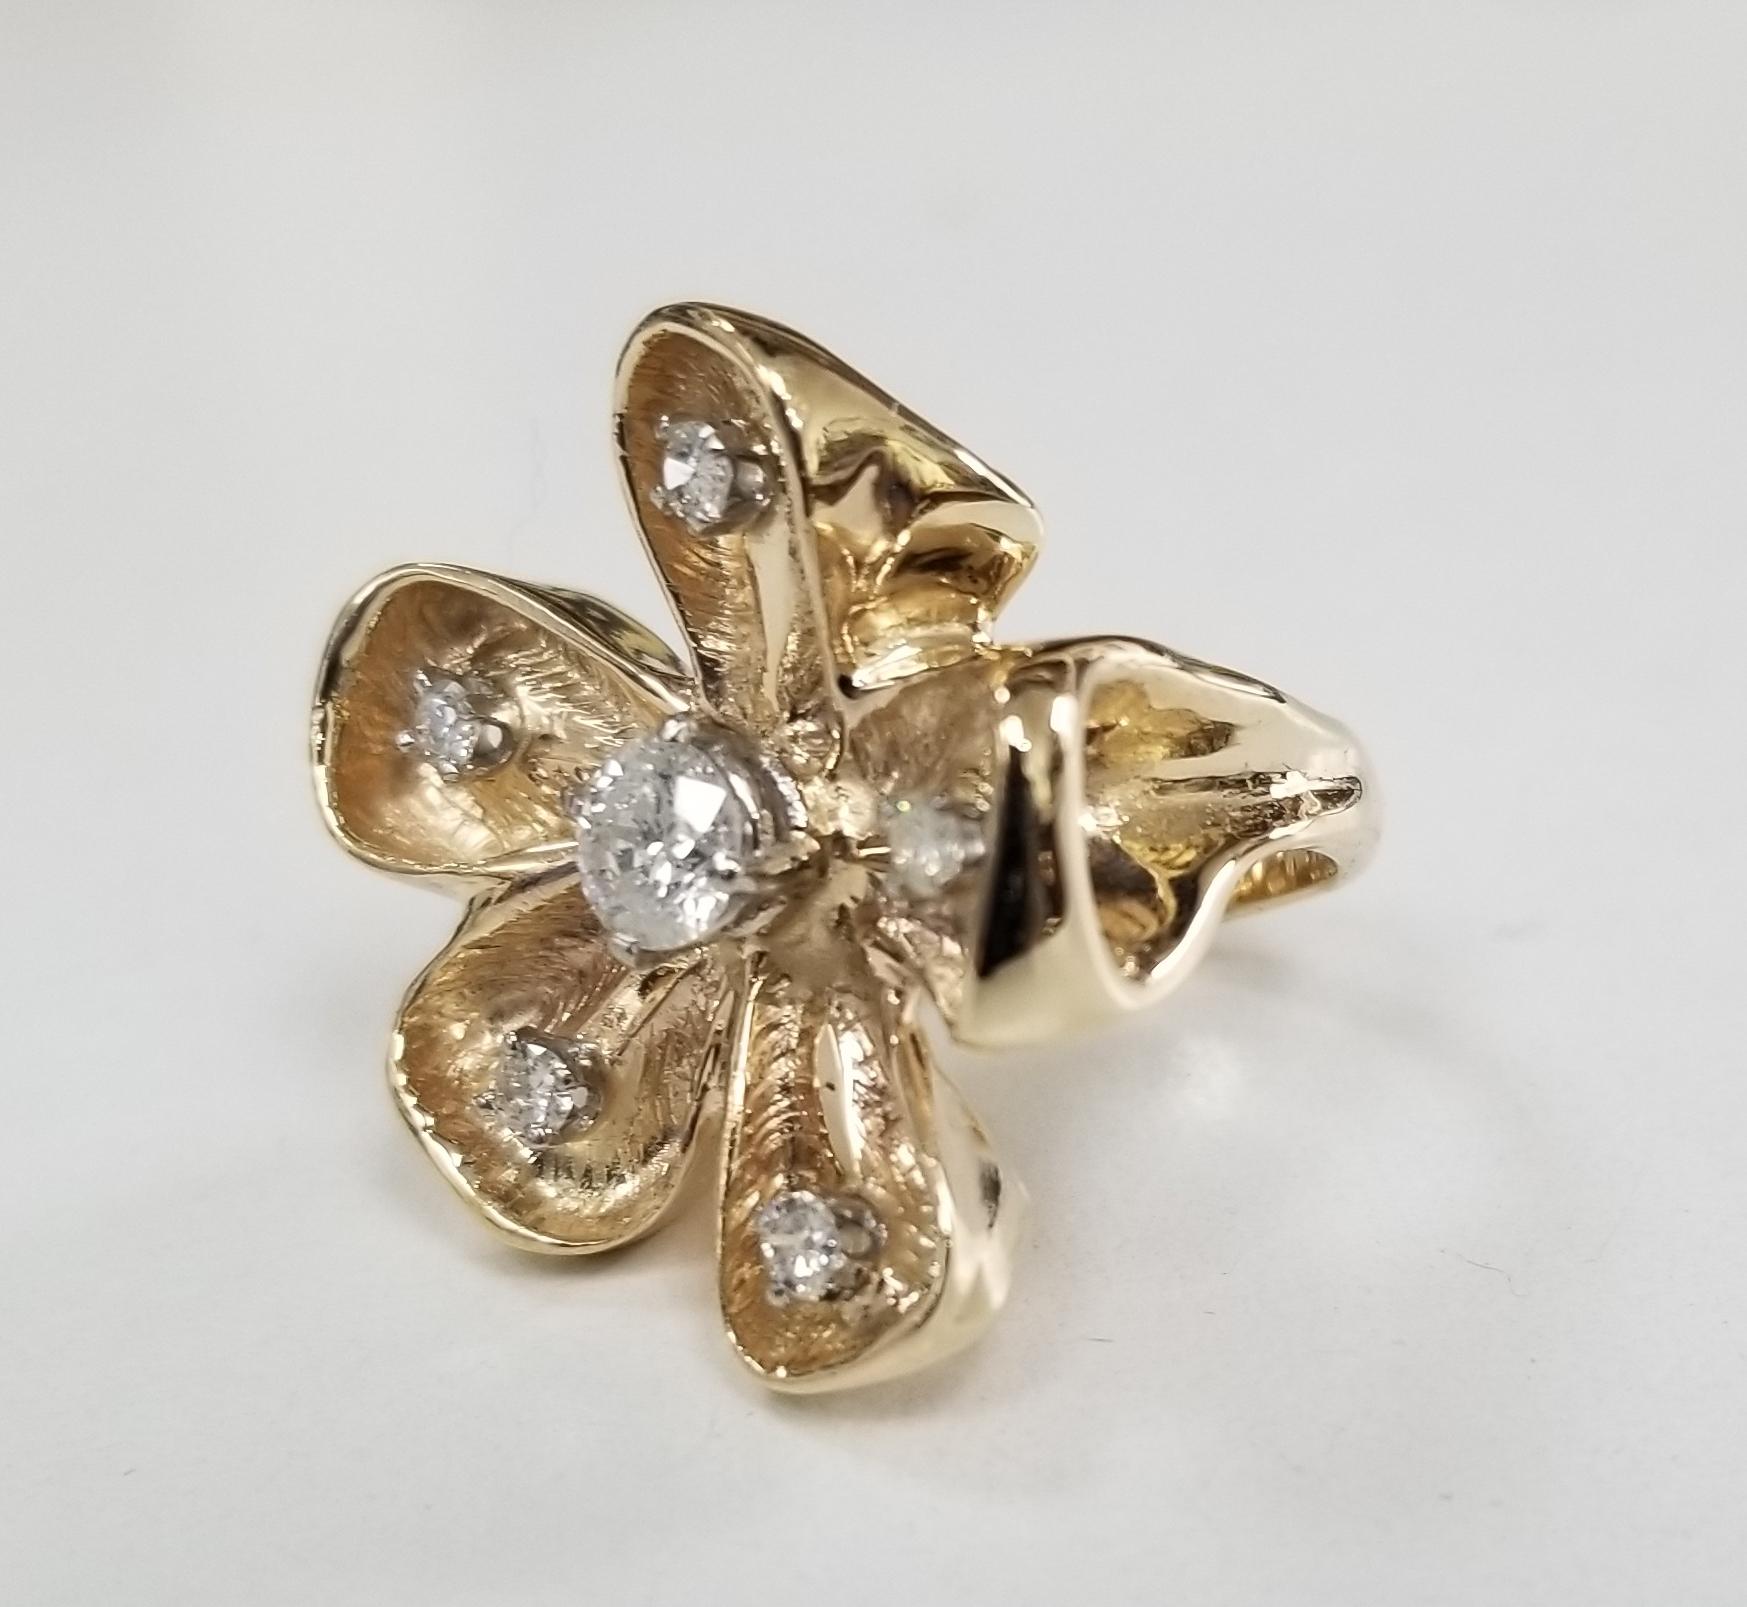 1960's Vintage 14k yellow gold diamond flower ring, containing 1 brilliant cut diamond weighing .41pts. and full cut diamonds of fine quality weighing .20pts.  the ring is a size 3 and can be size to fit for free.